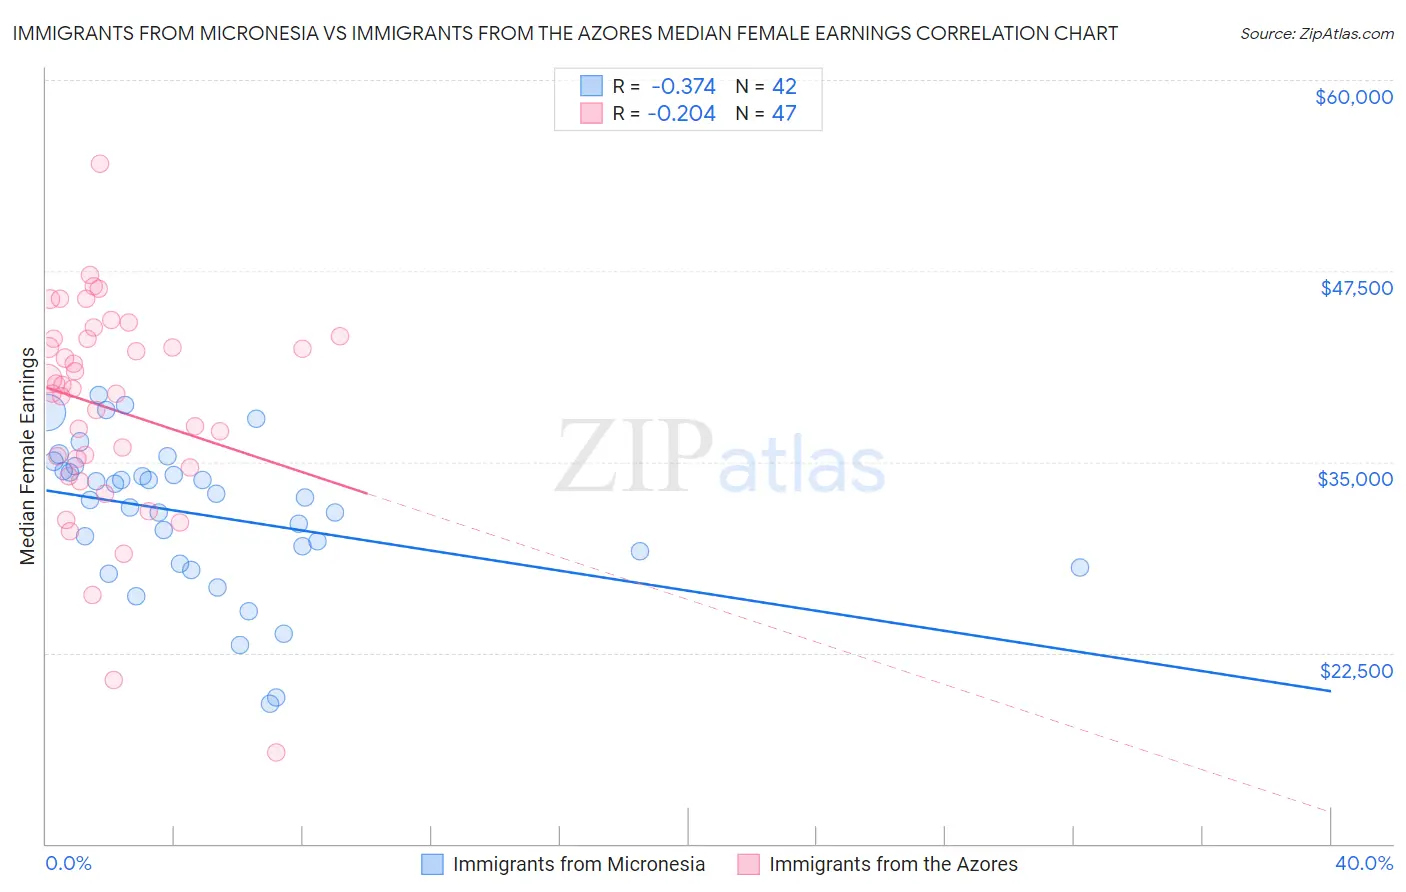 Immigrants from Micronesia vs Immigrants from the Azores Median Female Earnings